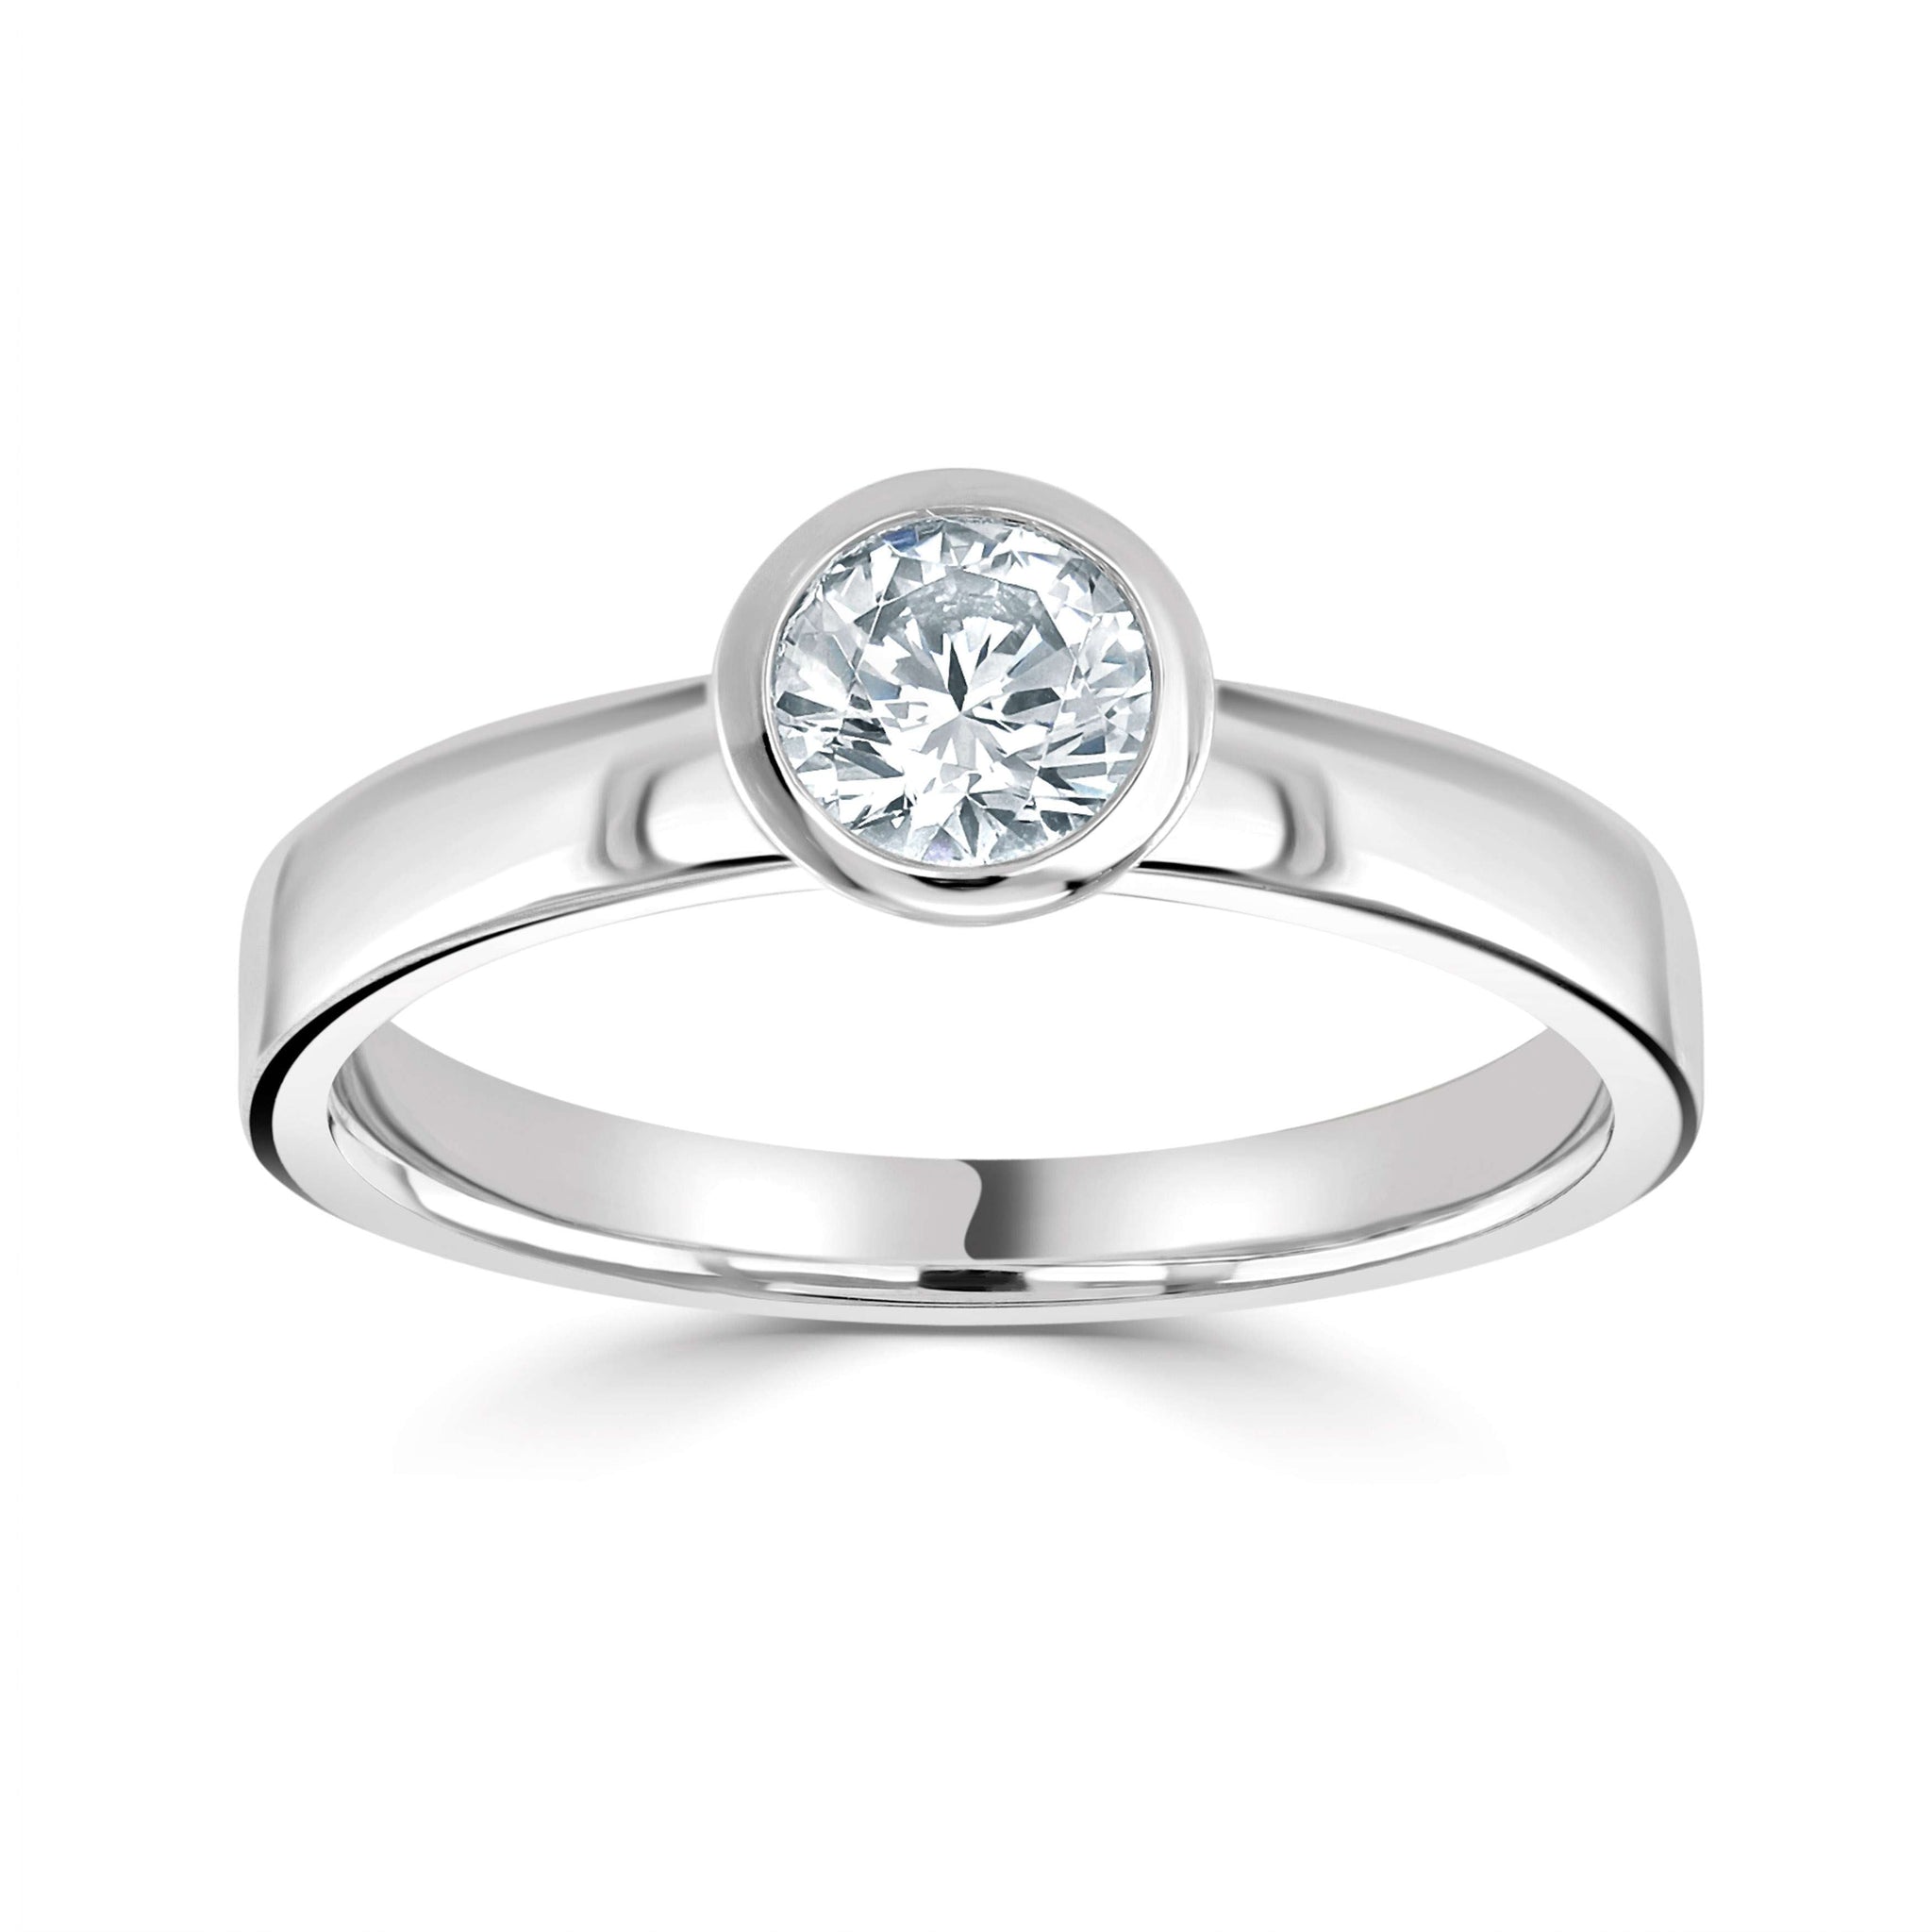 Joy *Select a Round Diamond 0.25ct or above